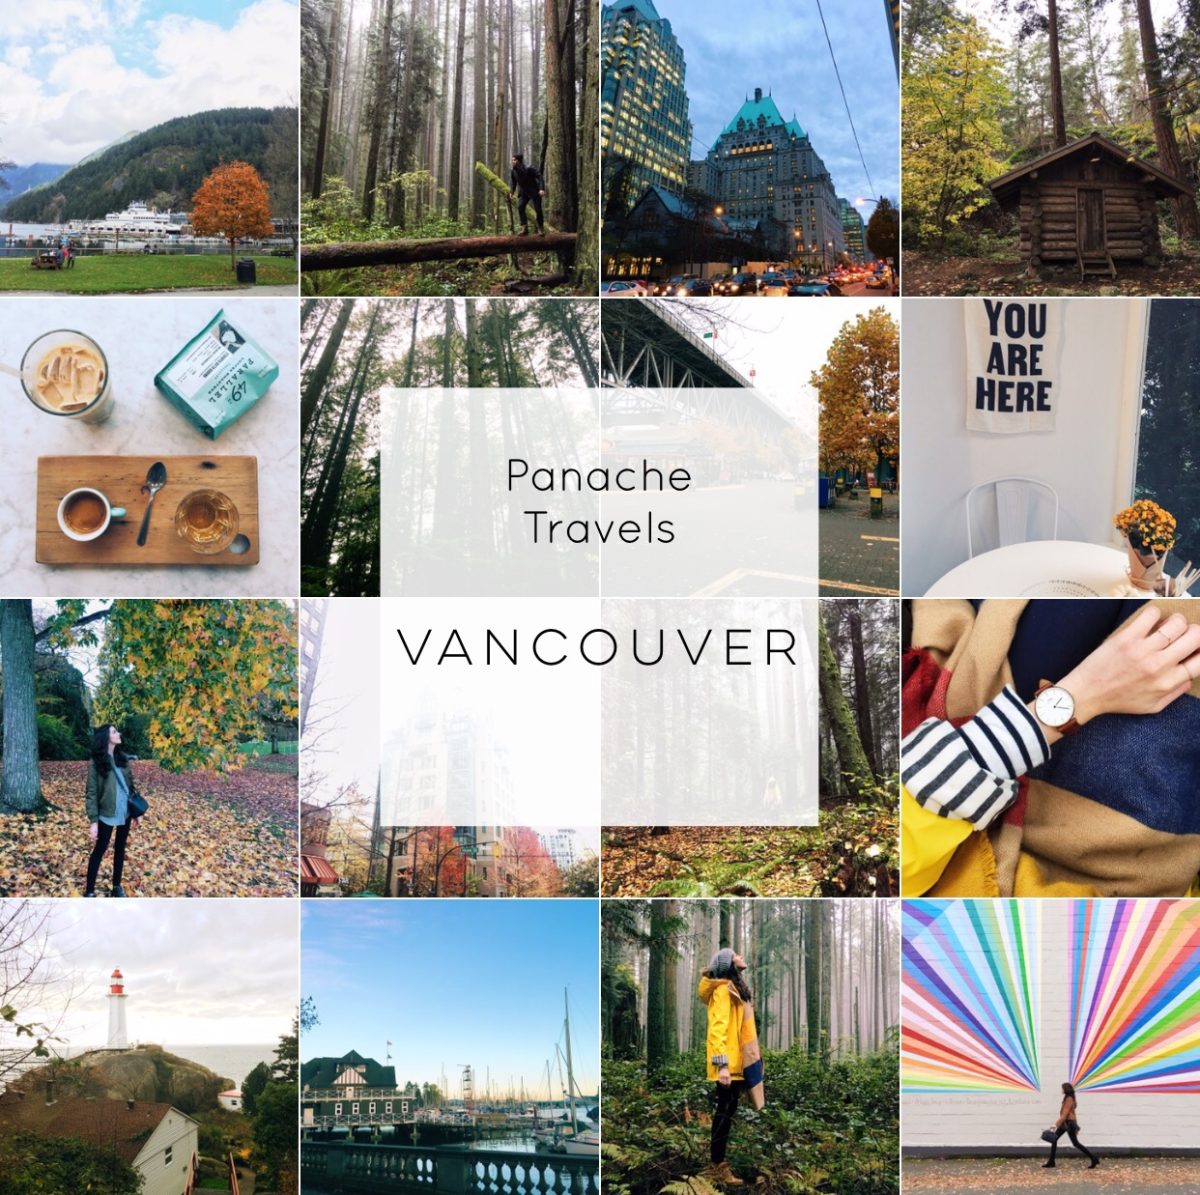 Jackie Roque shares her favorite spots in Vancouver